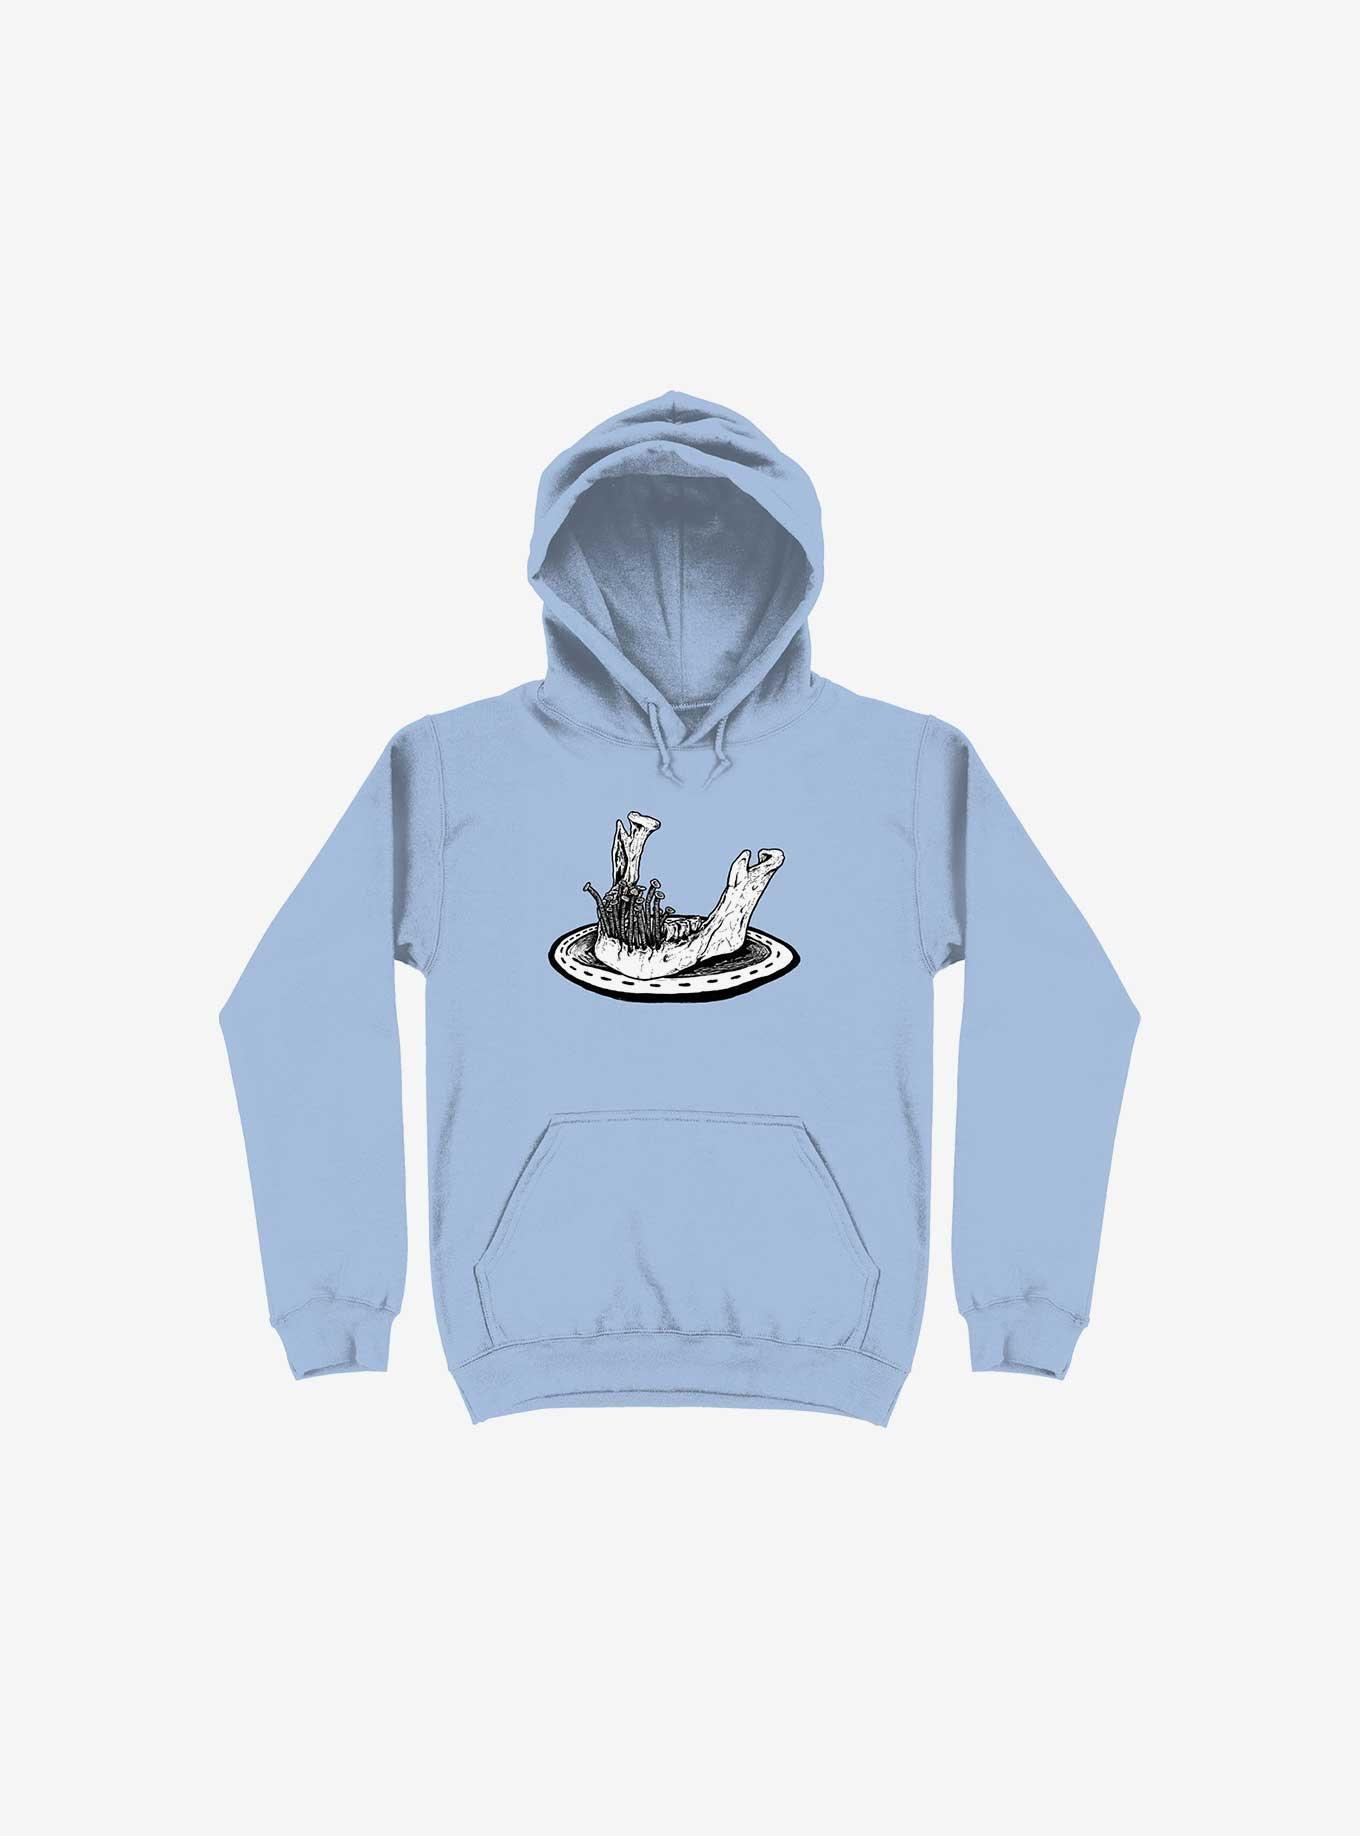 You Deserve Better Hoodie